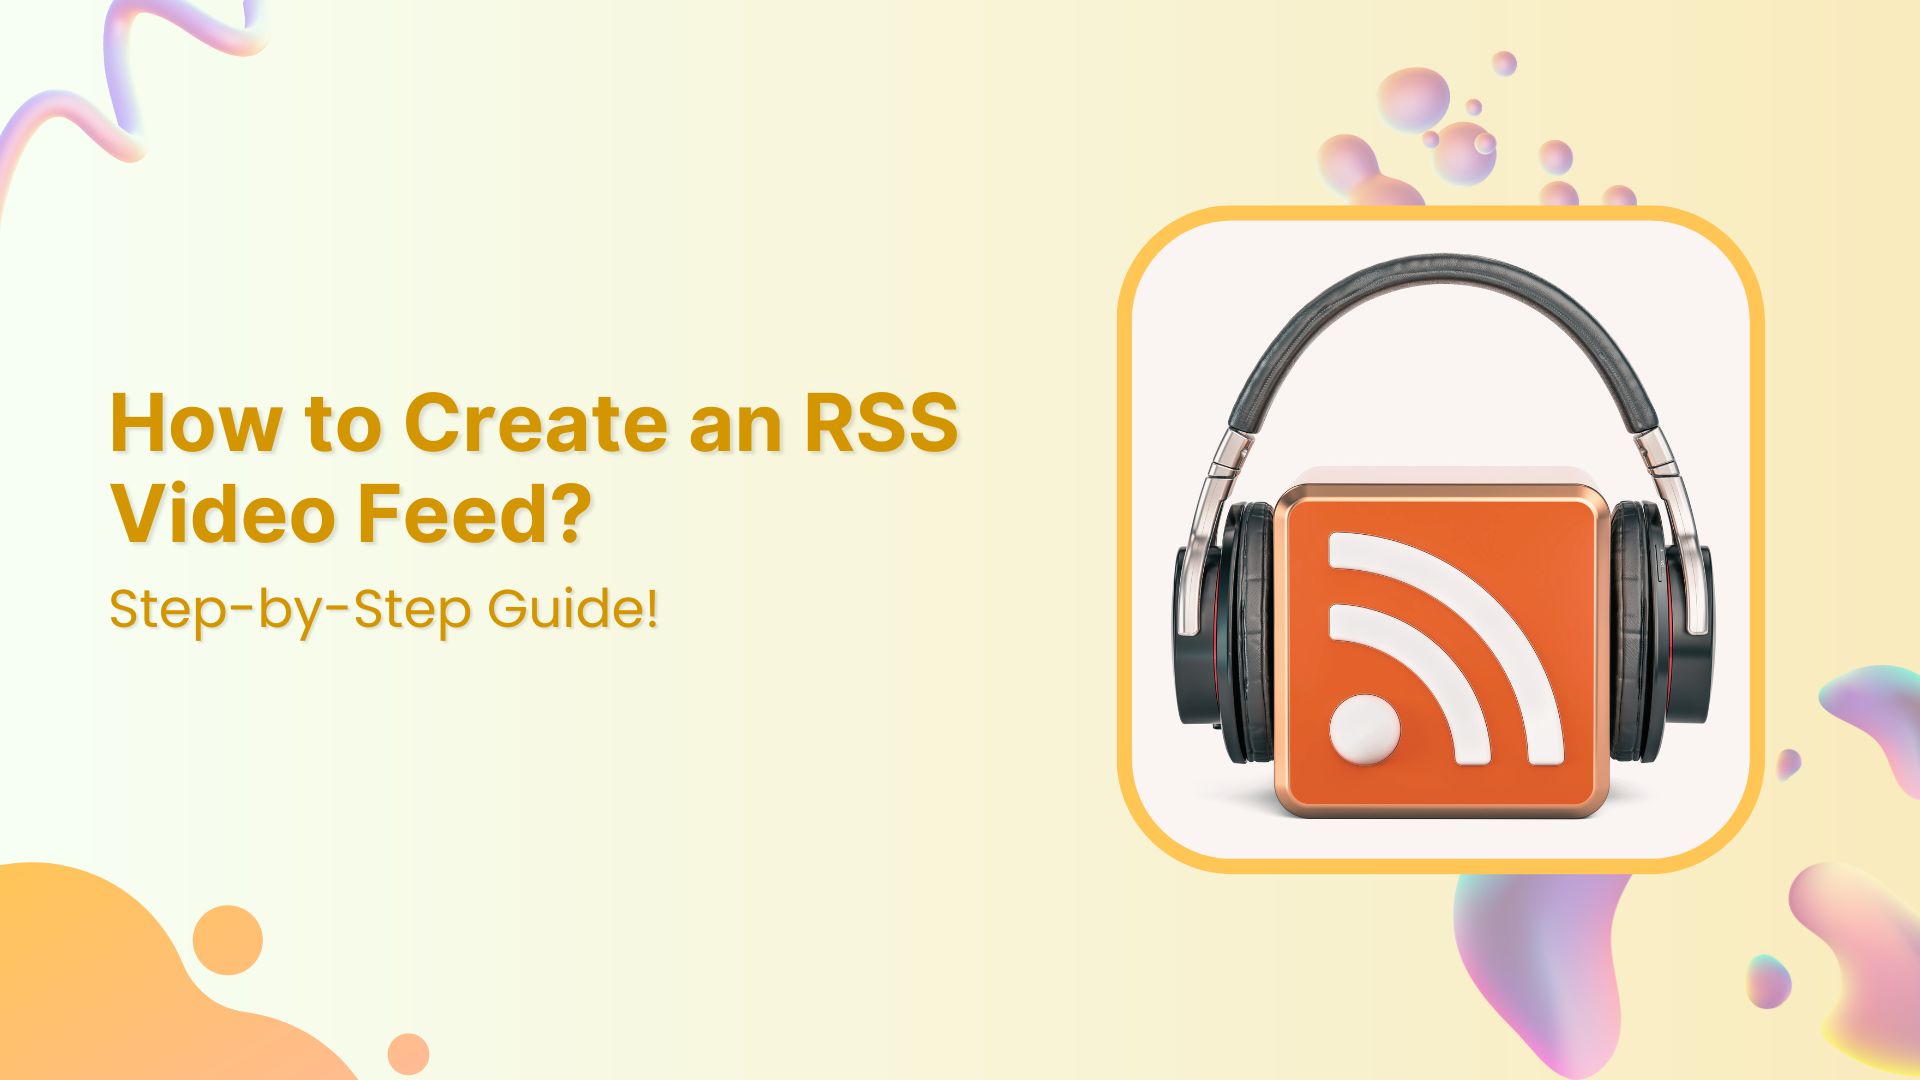 How to Create an RSS Video Feed Using Replug?